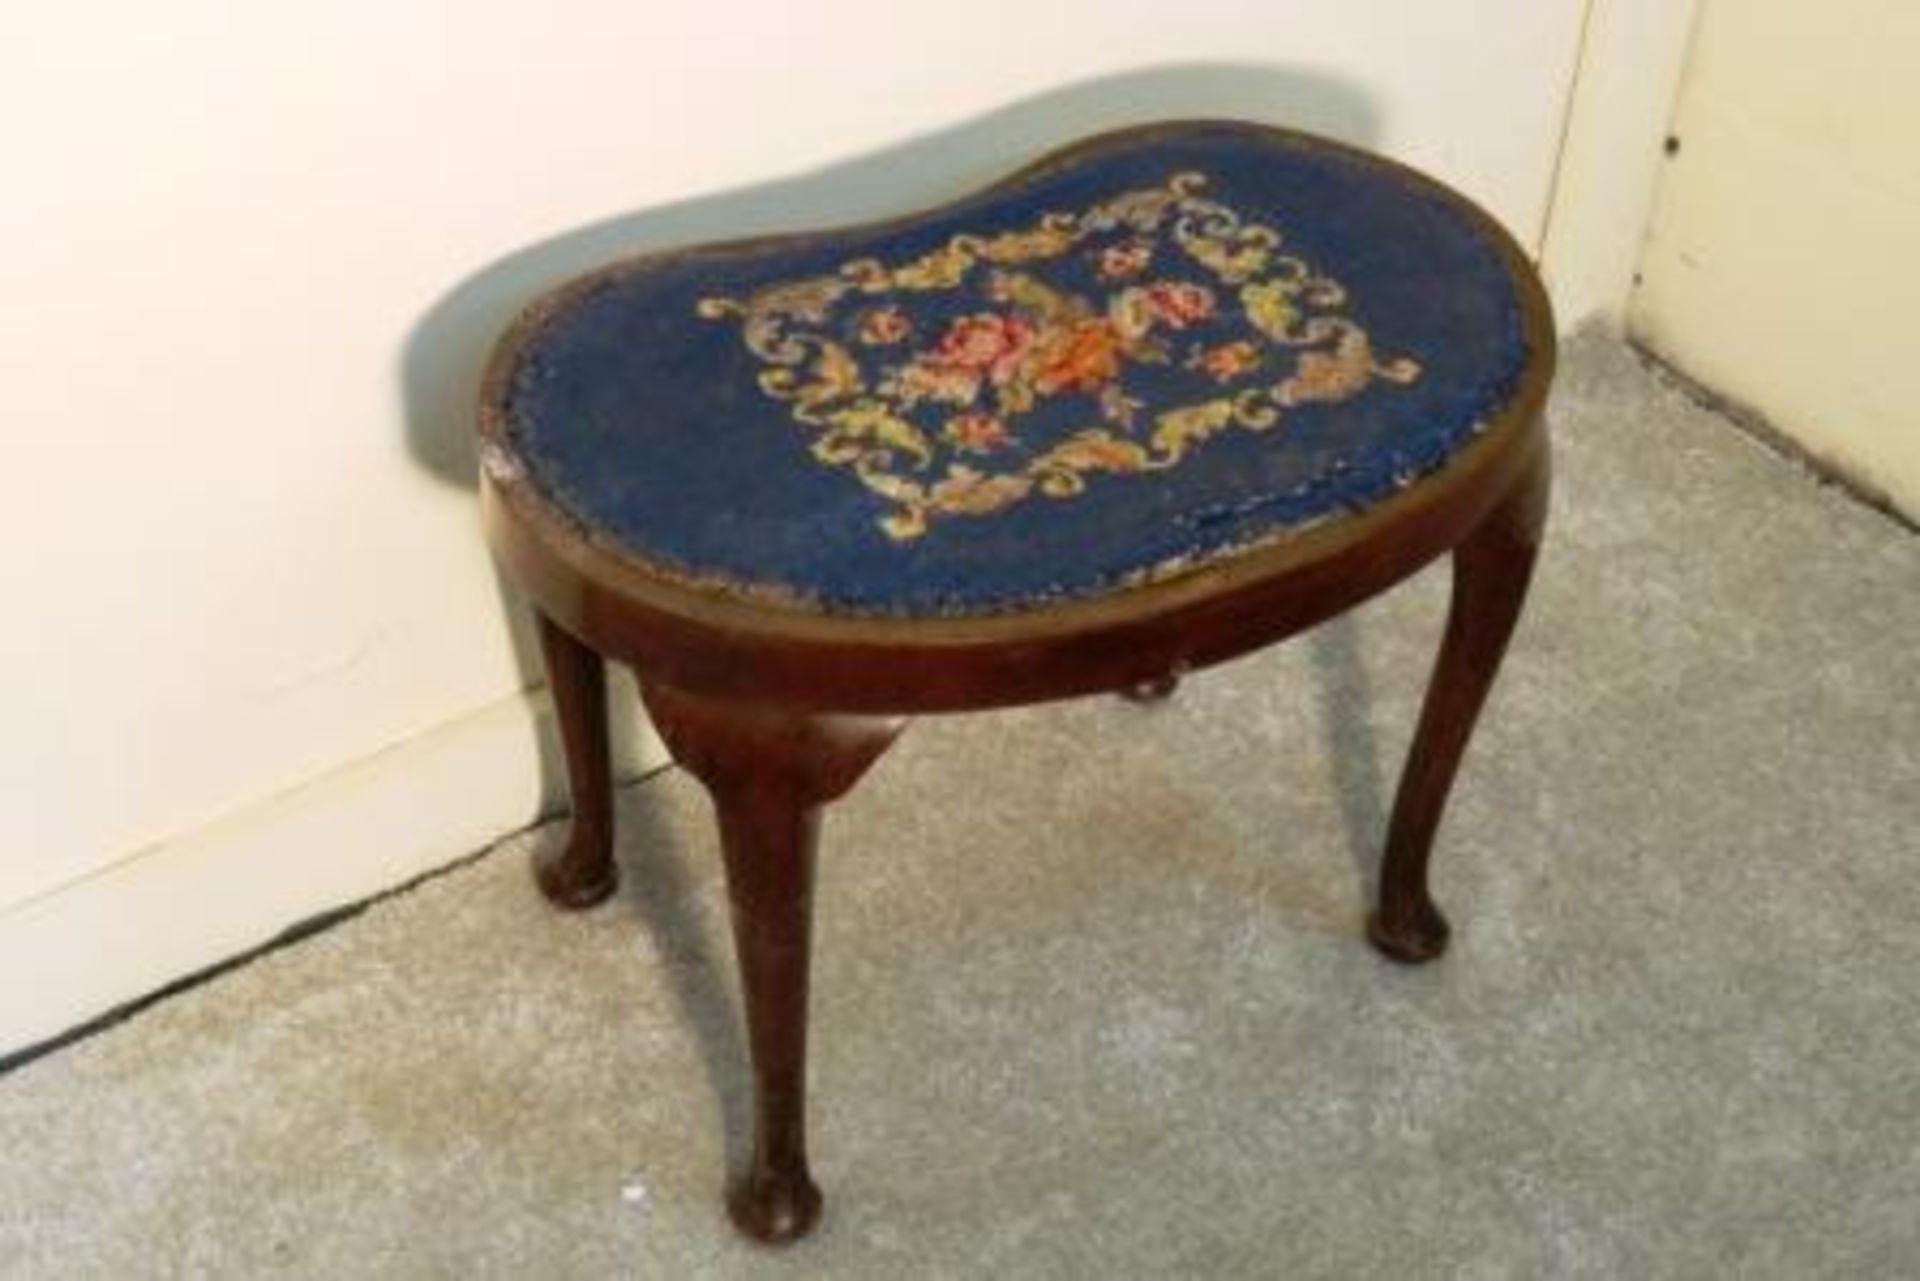 VINTAGE WOODEN STOOL WITH CROSS STITCHED SEAT AND QUEEN ANN LEGS